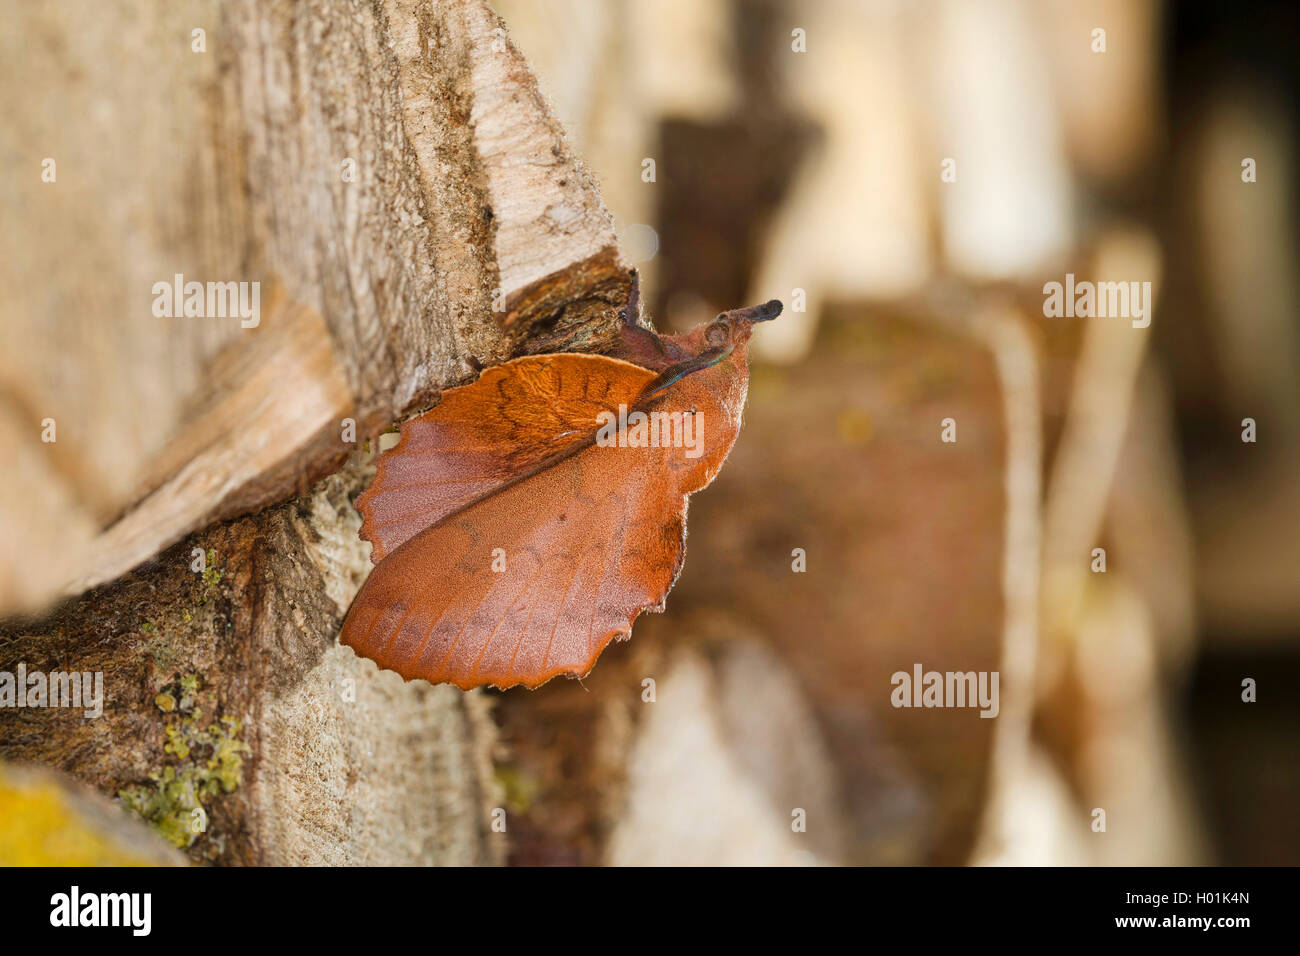 lappet (Gastropacha quercifolia, Phalaena quercifolia), at billets of wood, side view, Germany Stock Photo